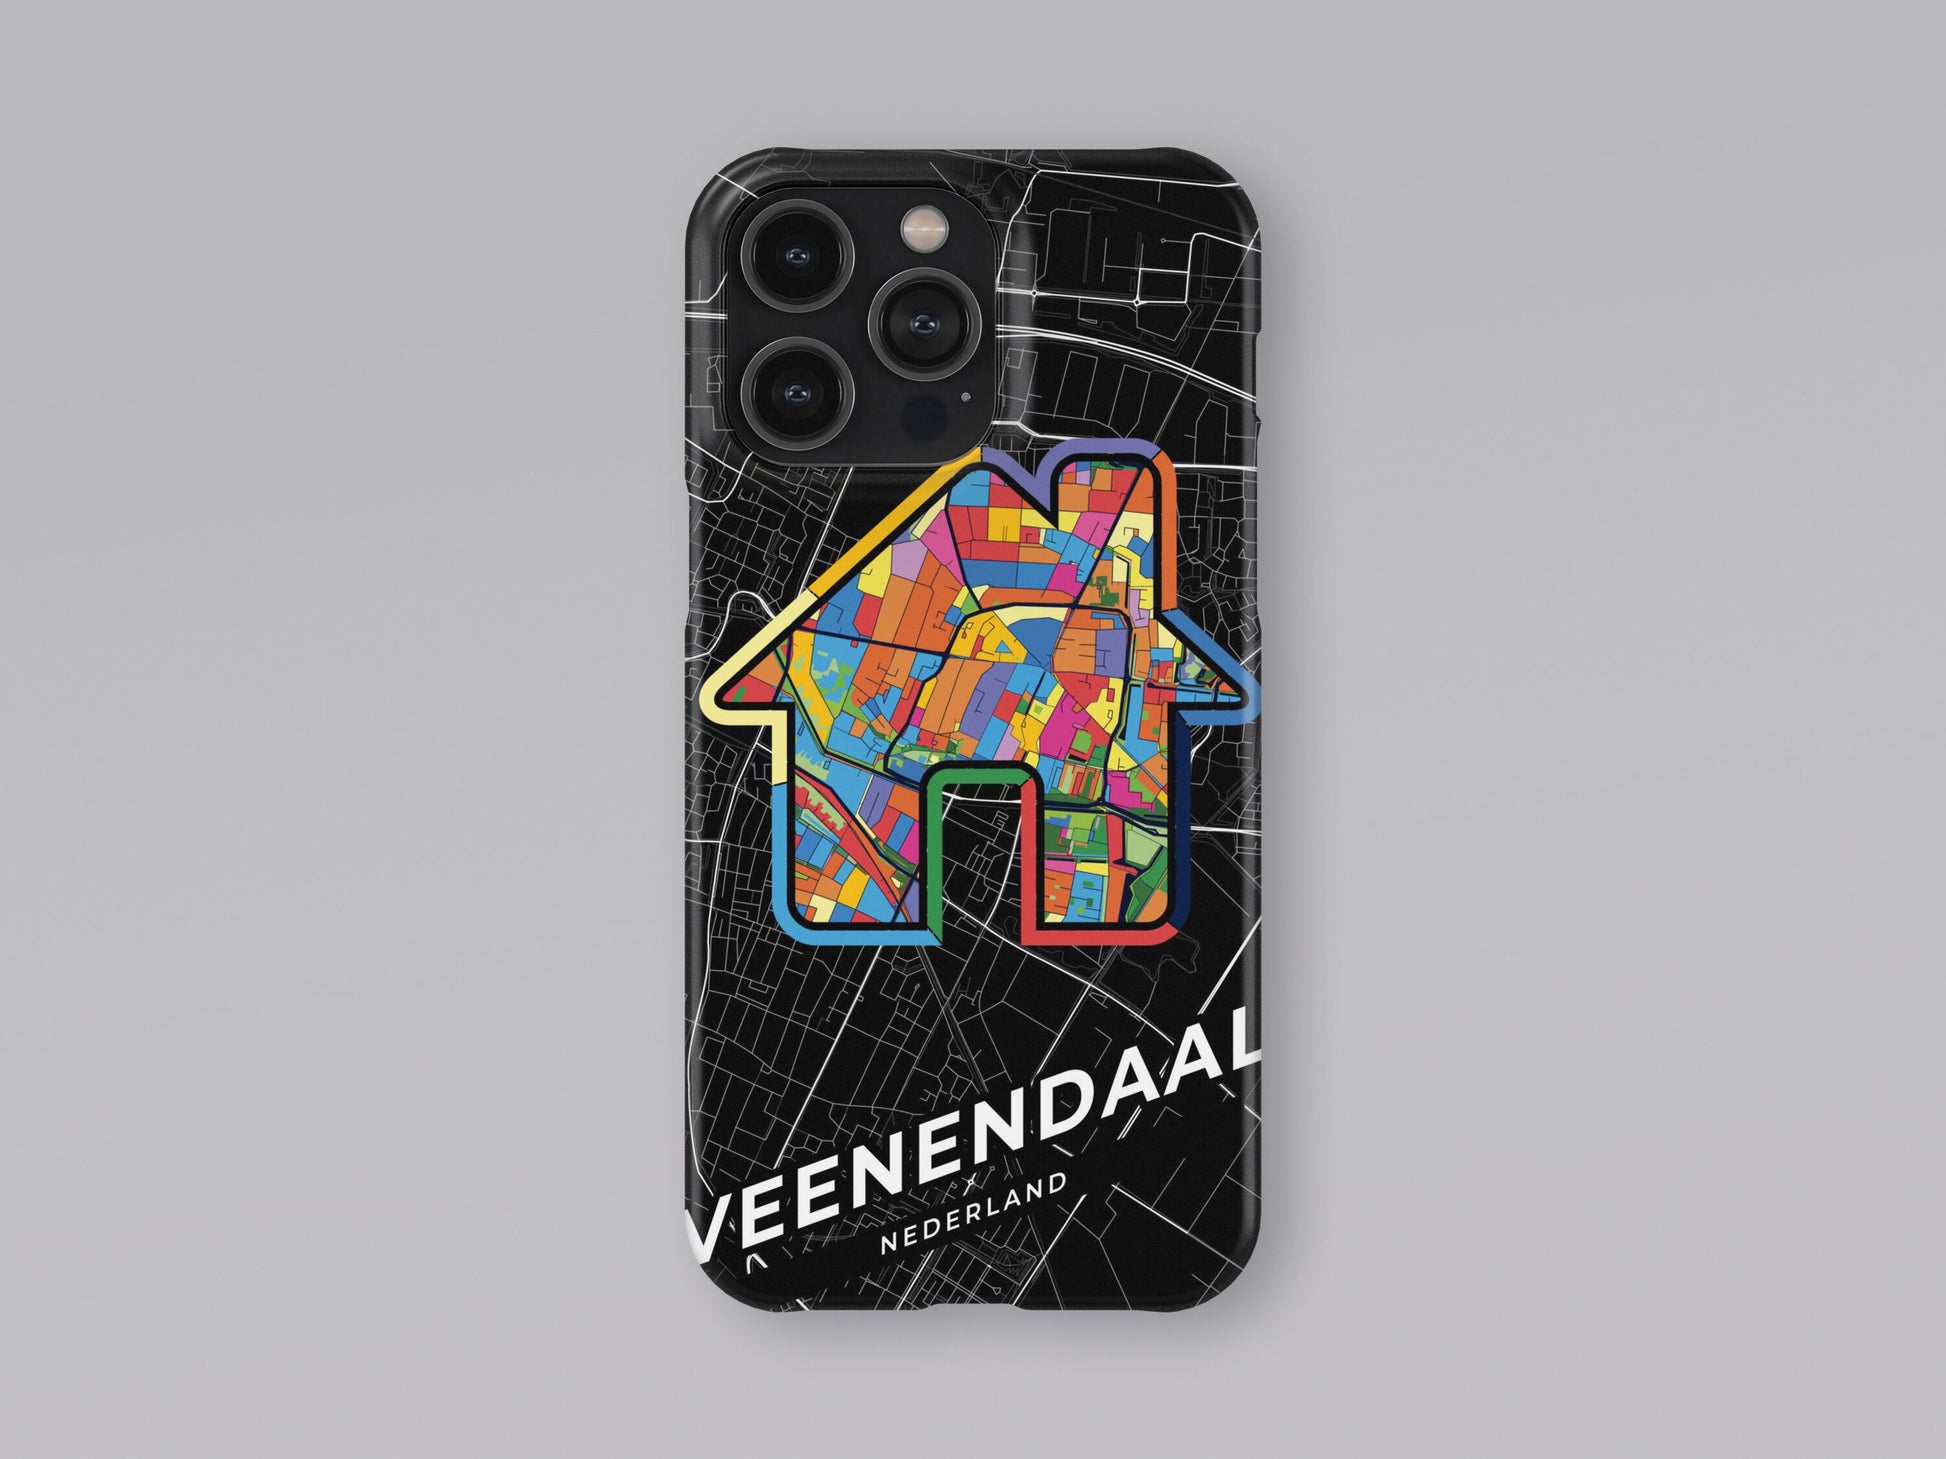 Veenendaal Netherlands slim phone case with colorful icon 3